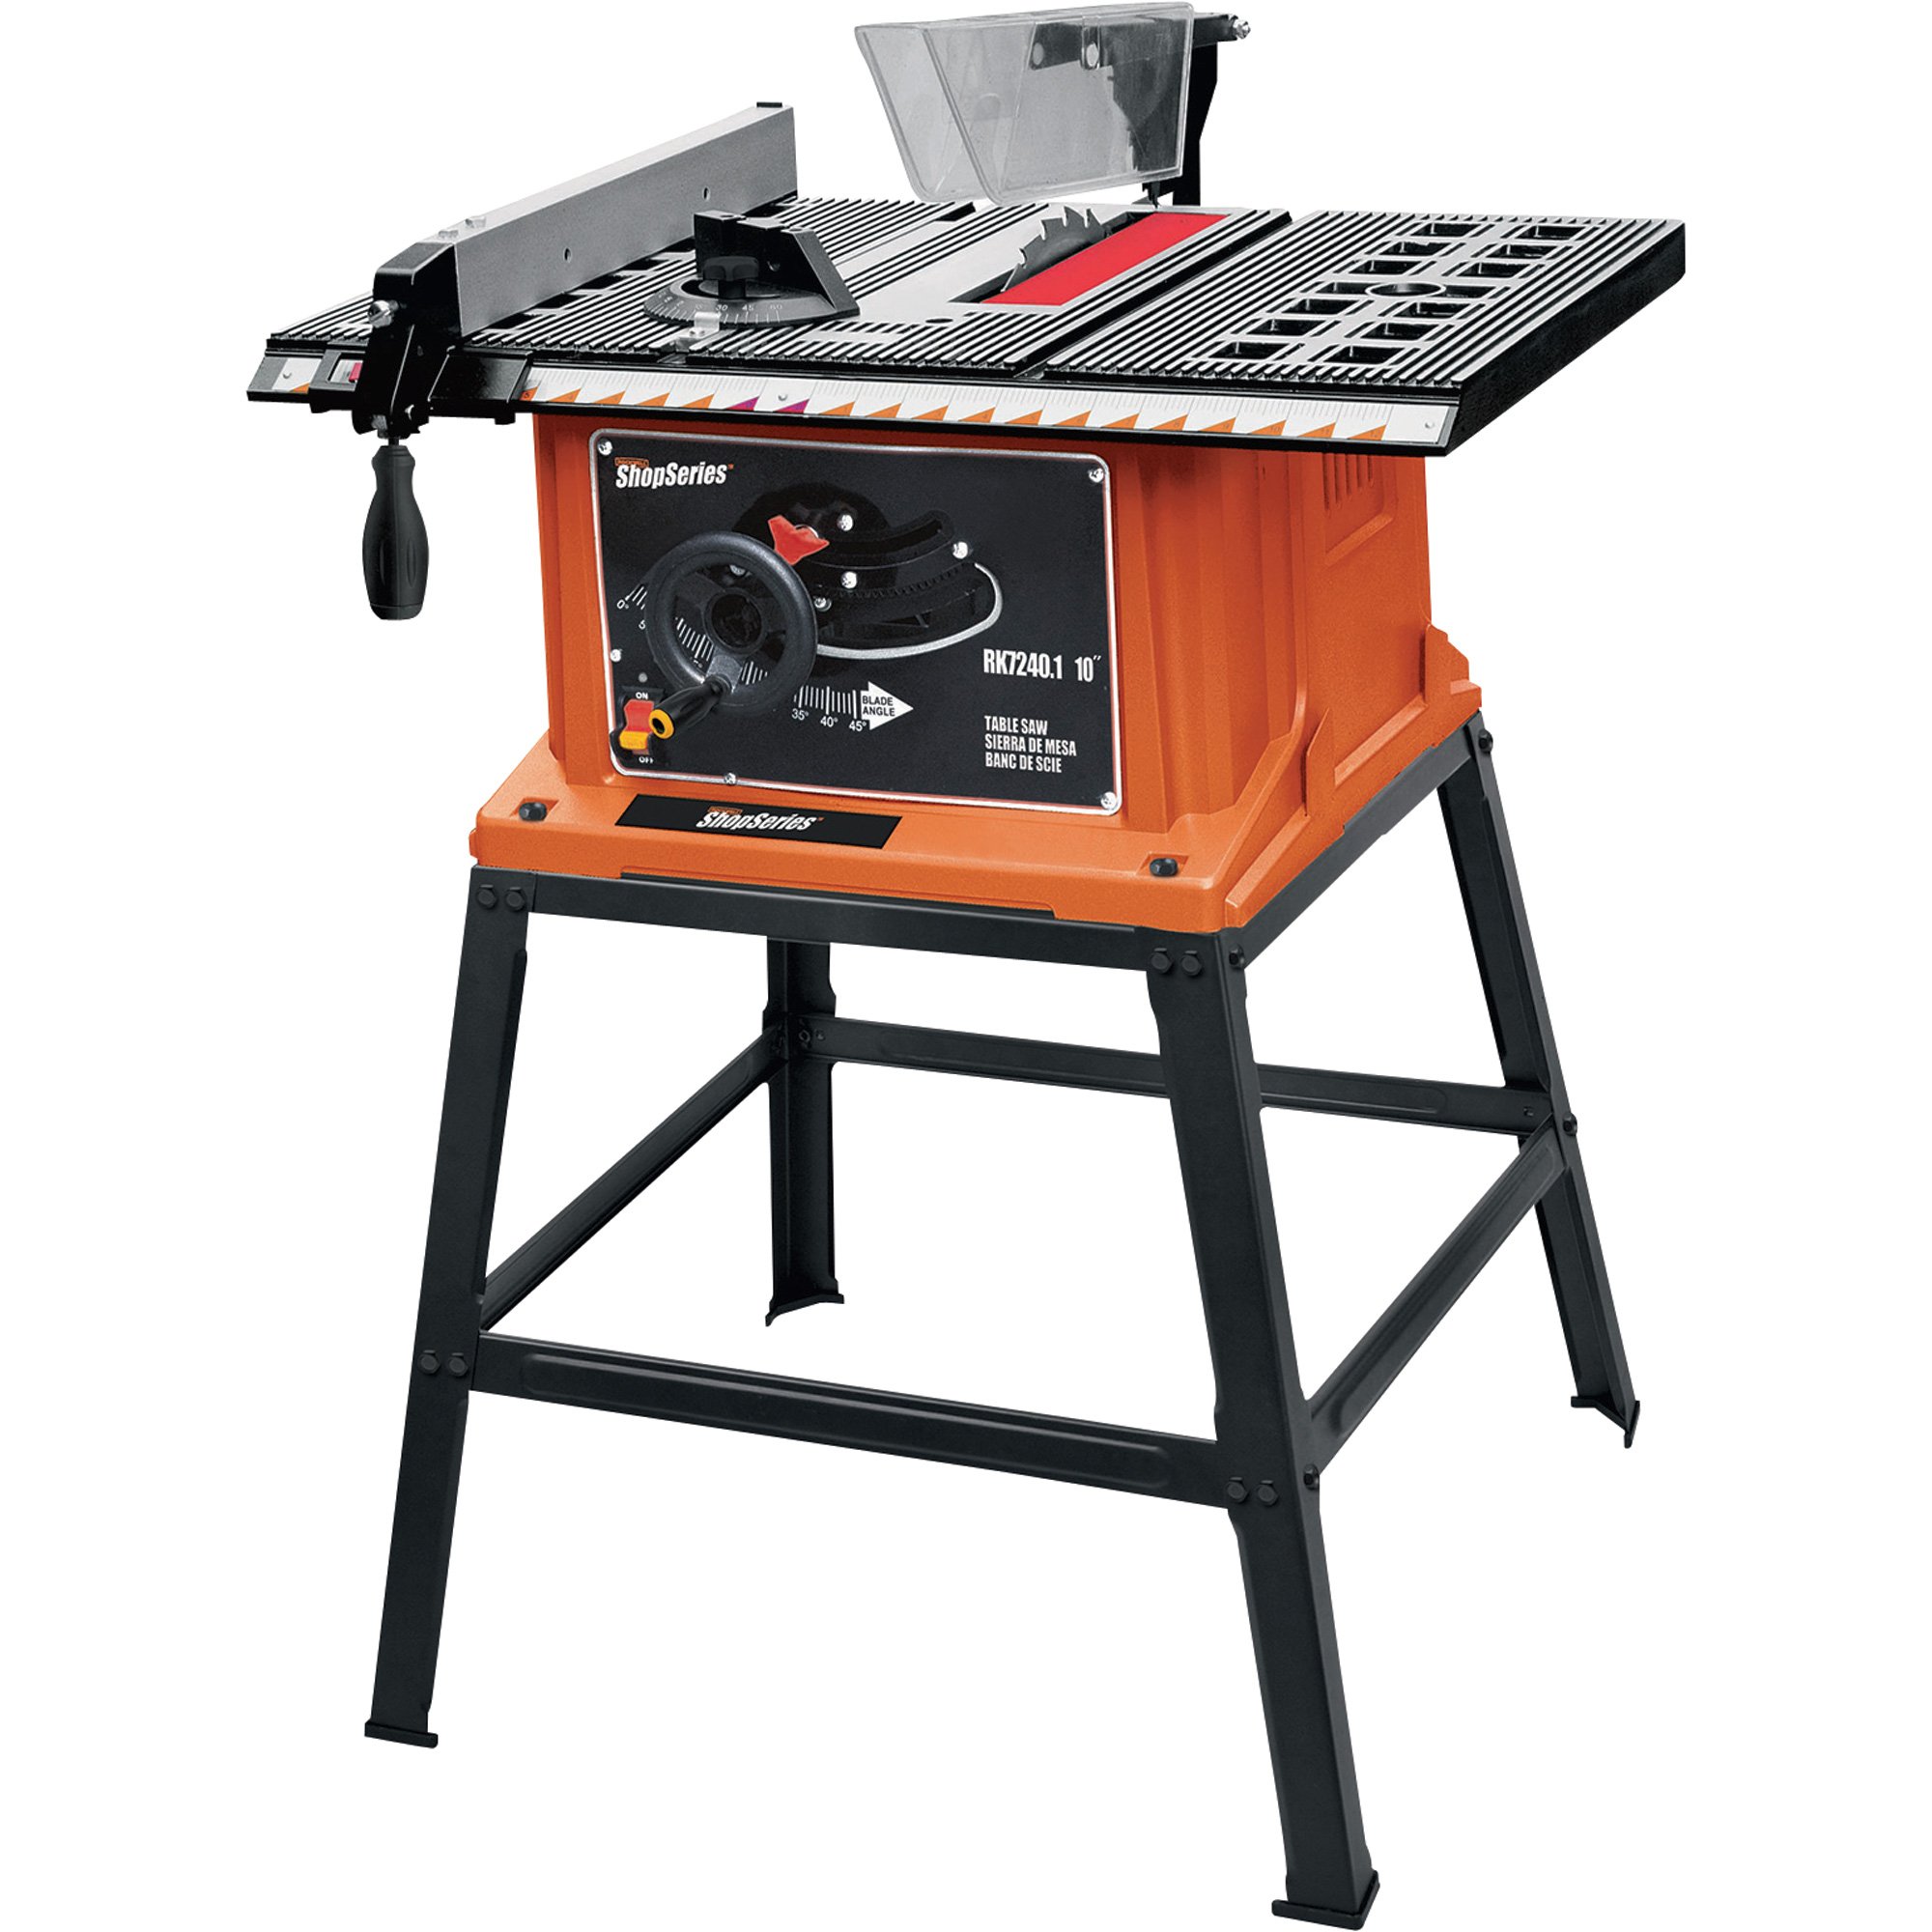 Rockwell ShopSeries Heavy-Duty Benchtop Table Saw — 10in., 13 Amps, Model#  RK7240.1